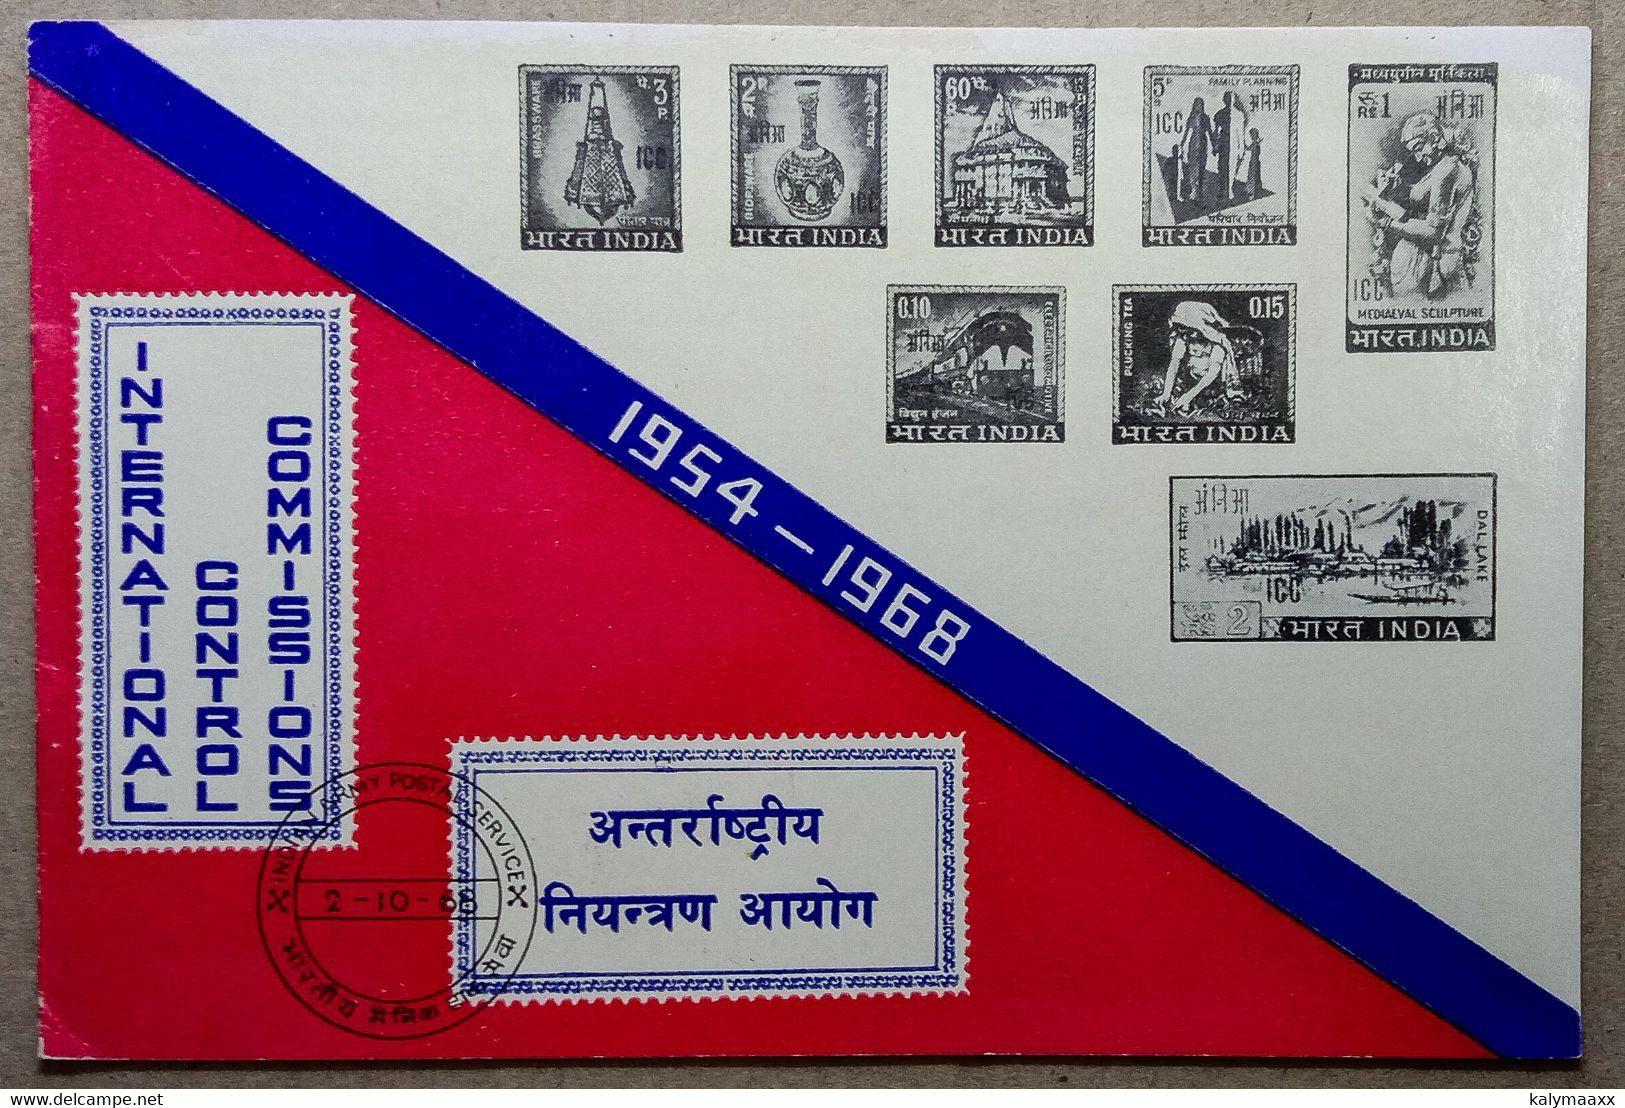 INDIA 1968 ICC OVERPRINTED COMPLETE SET OF 2 F.P.O CANCELLED COVERS & INFORMATION BROCHURE, VIETNAM, LAOS, CAMBODIA - Military Service Stamp